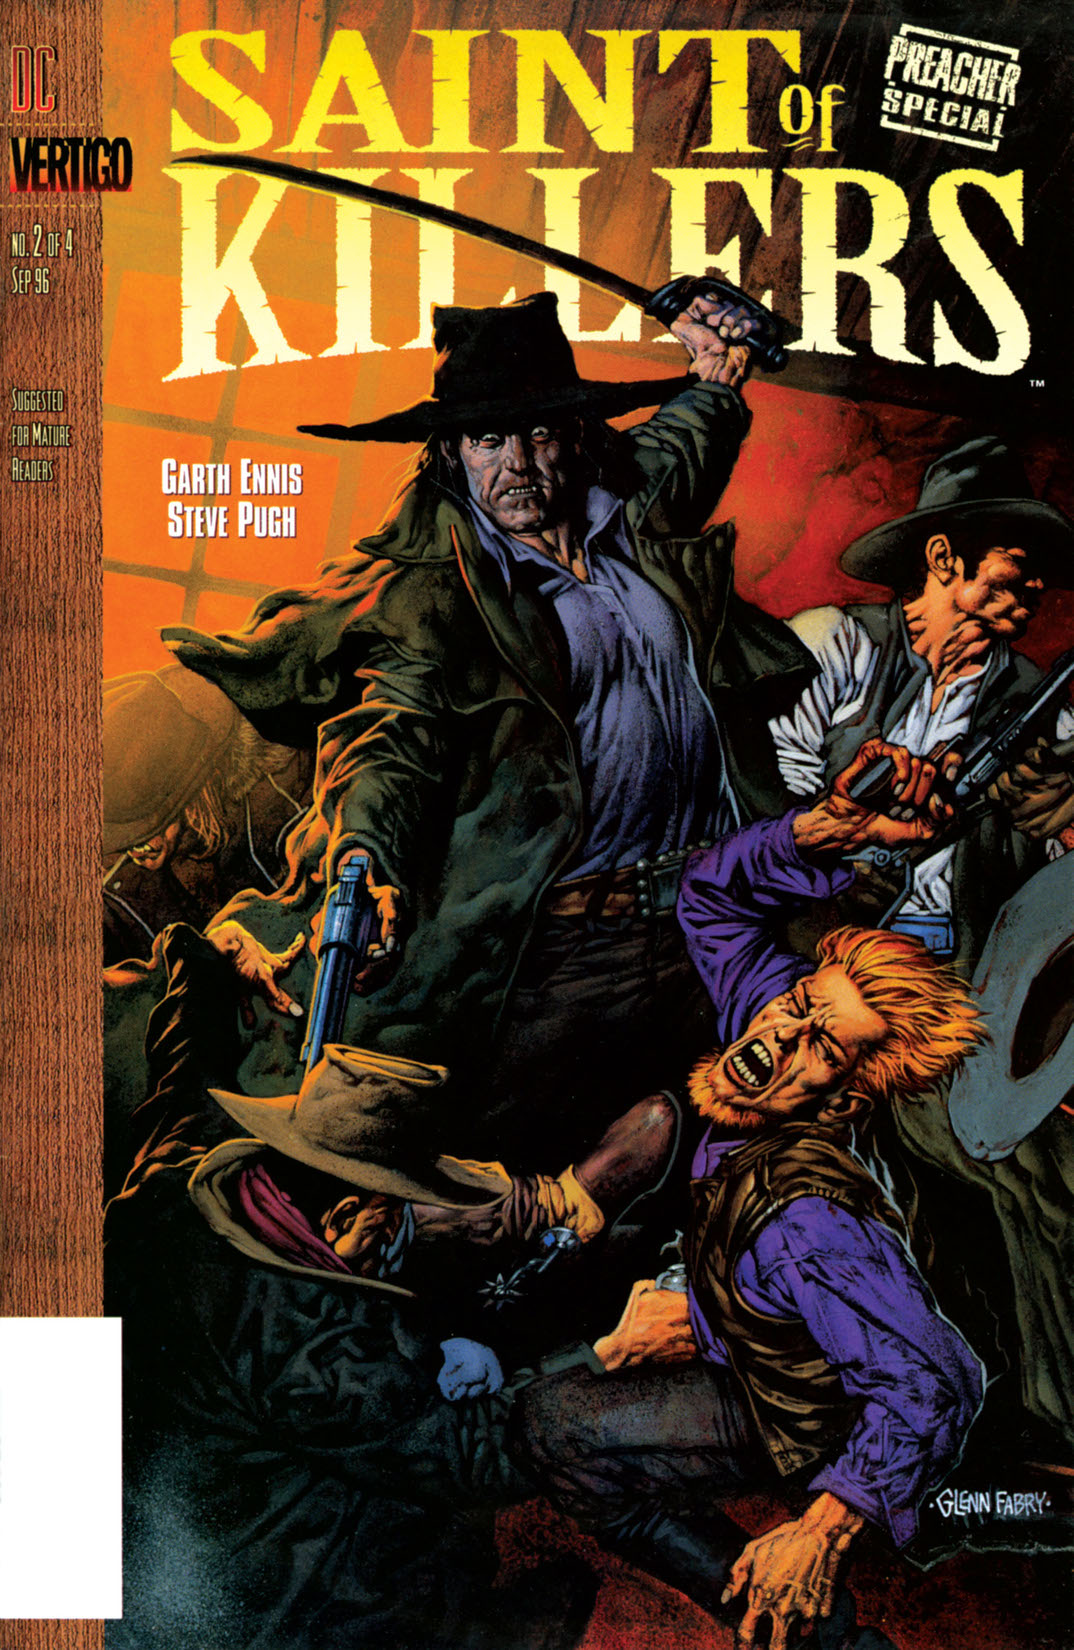 Preacher Special: Saint of Killers #2 preview images